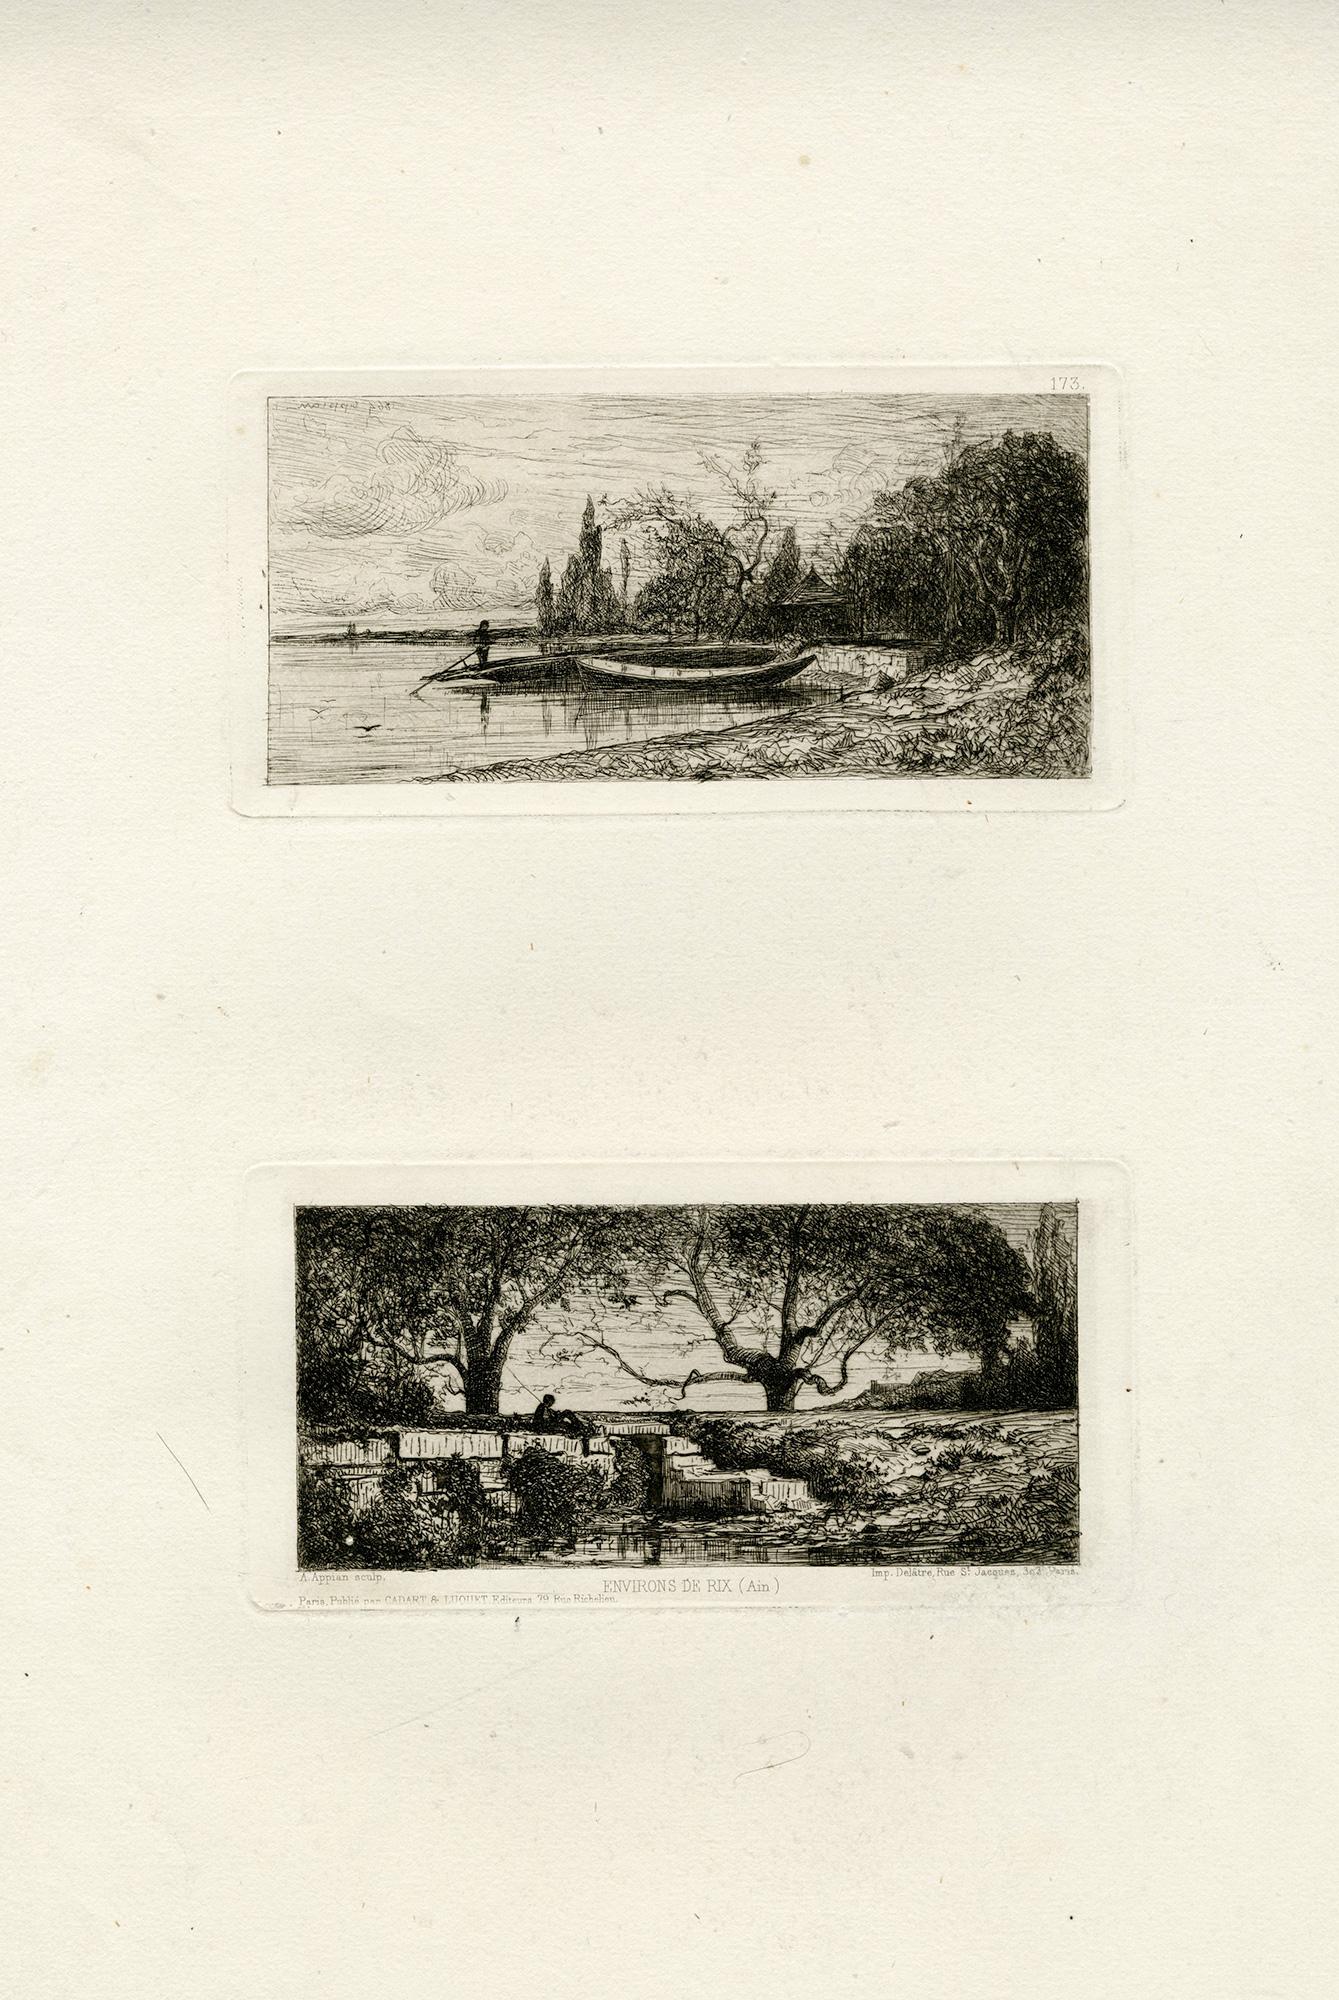 TWO WORKS / Paris: Cadart, 1865. 
Each an etching printed on one sheet of buff wove paper. Each impression measuring 3 1/2 x 7 inches (88 x 177 mm), full margins. With the Cadart blindstamp in the lower-center margin. In good condition with some